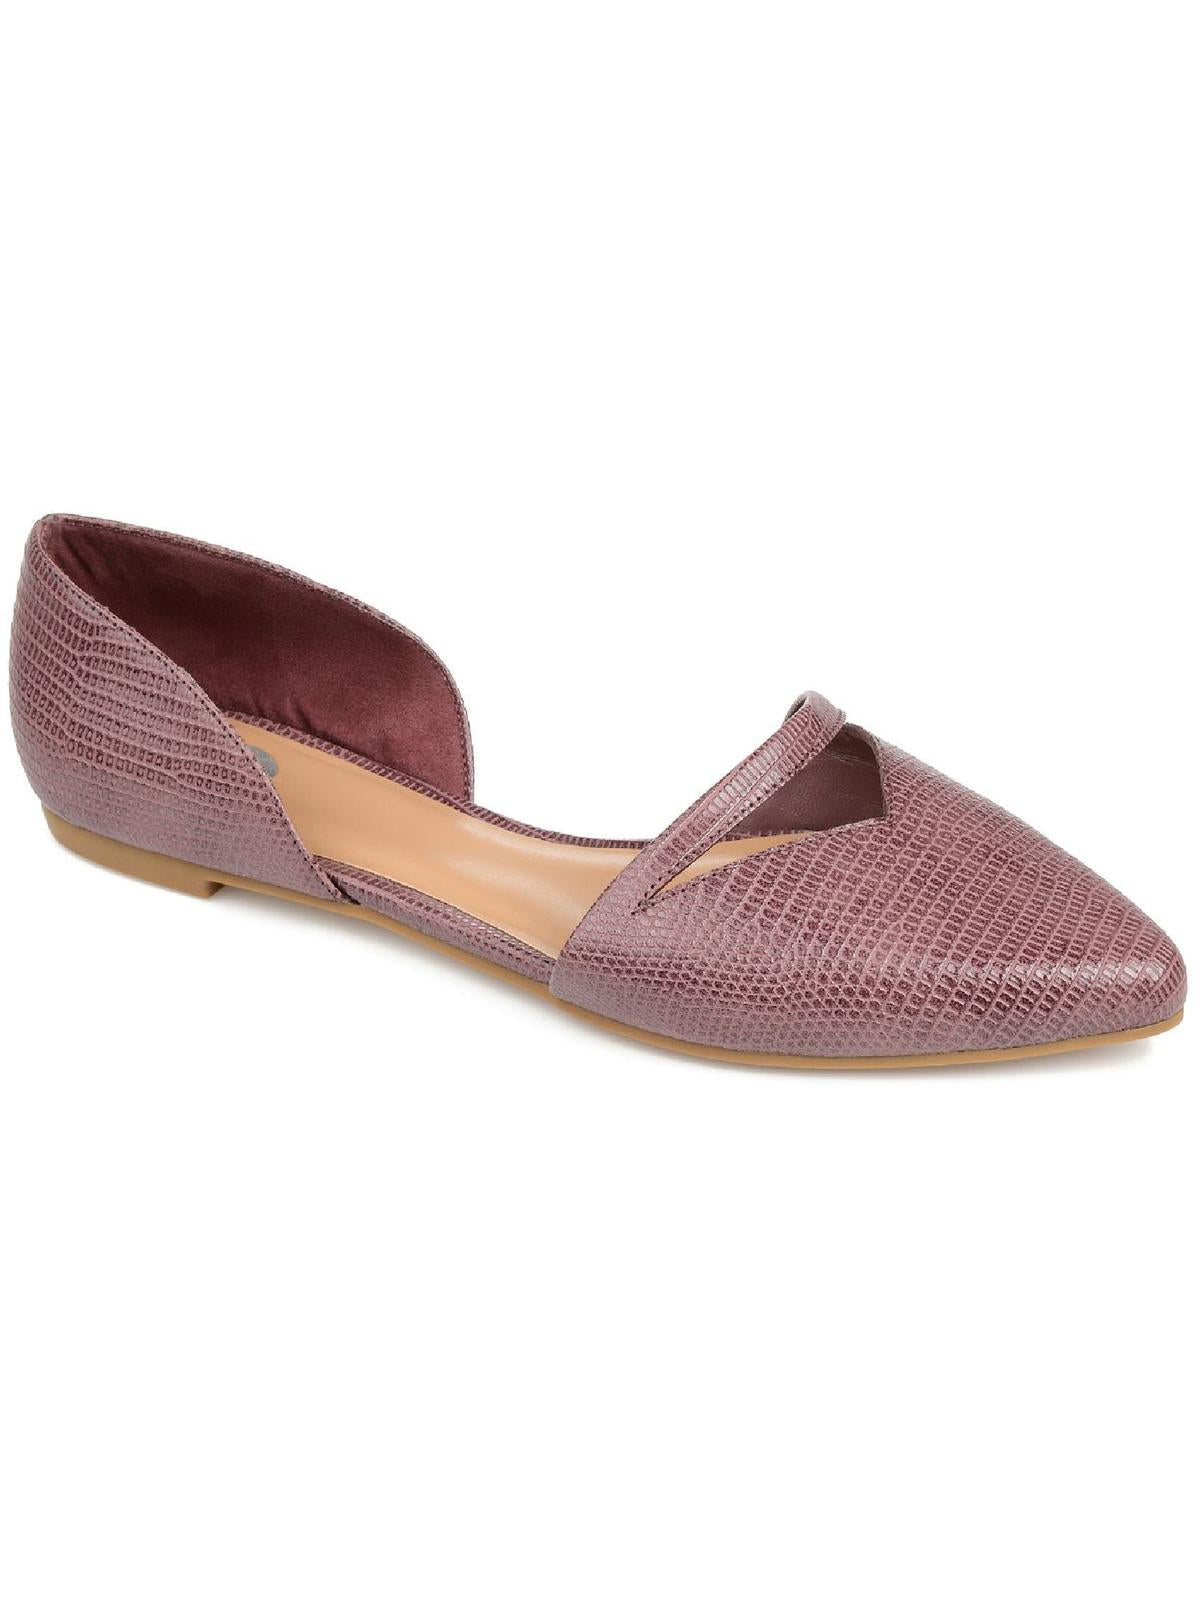 JOURNEE COLLECTION Braely Womens Faux Leather D'Orsay Flats